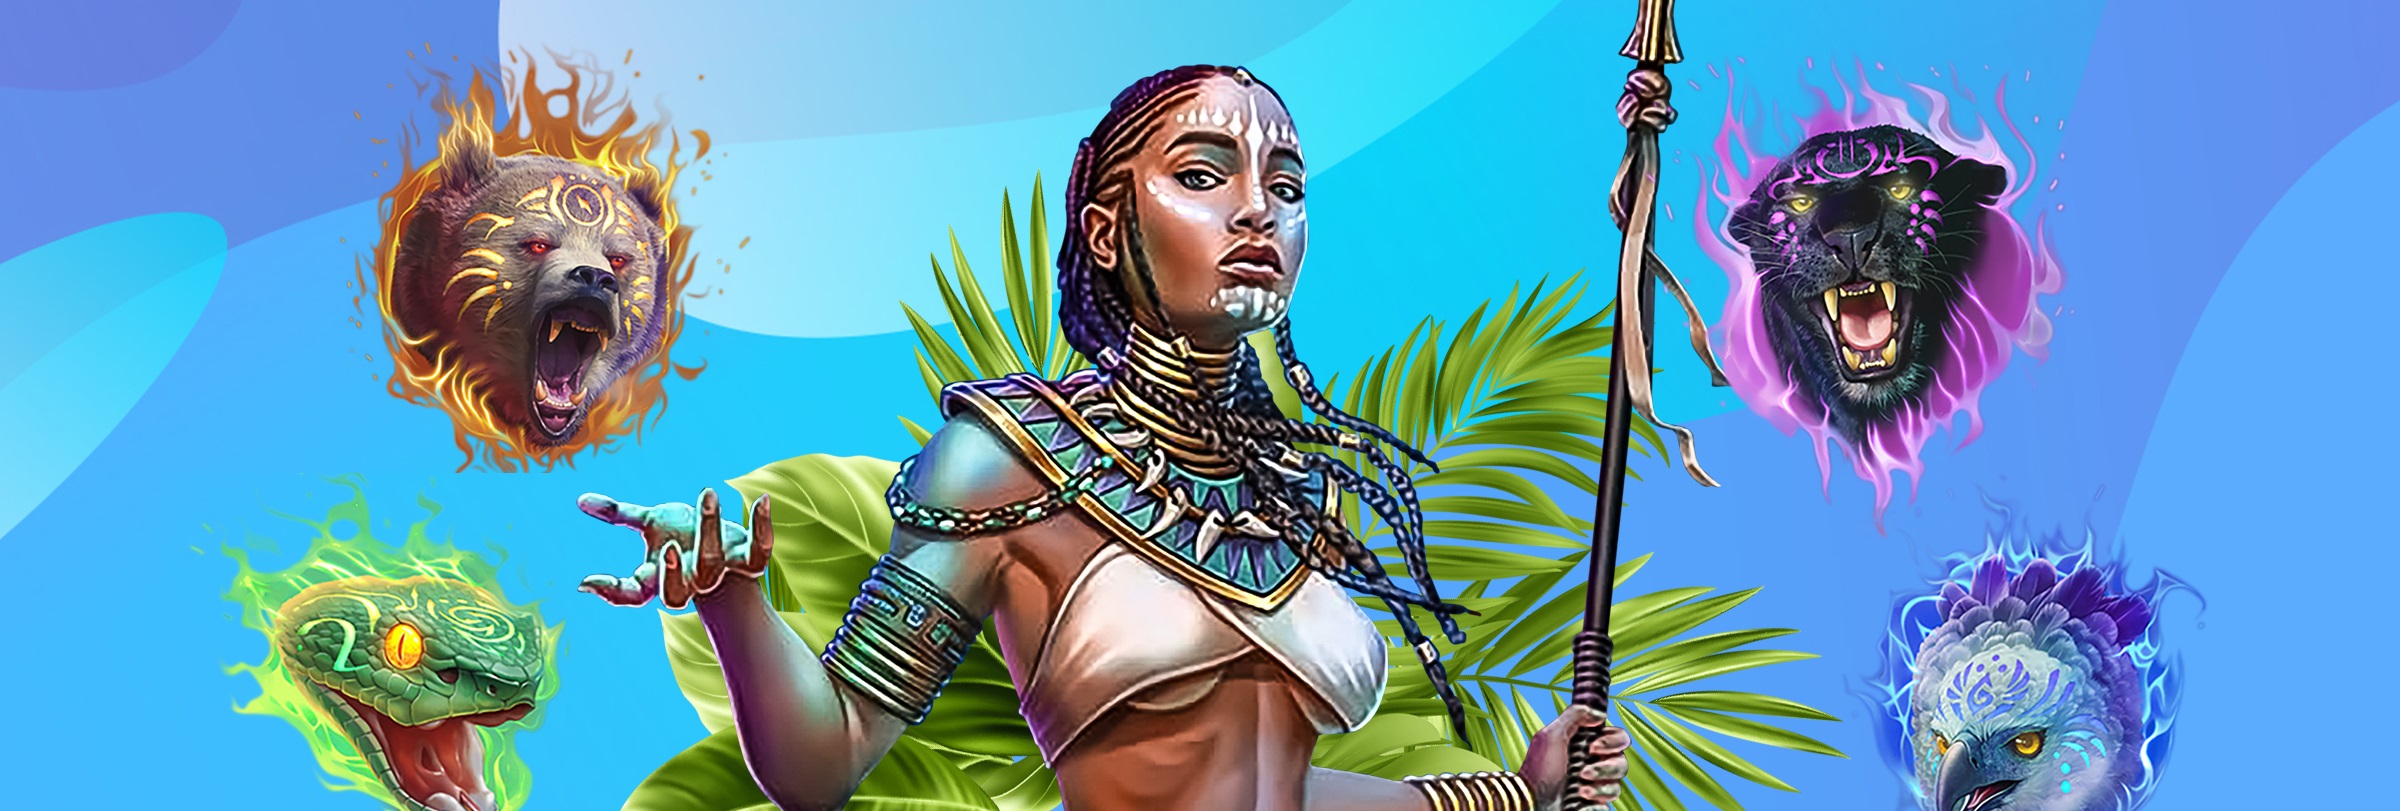 A 3D-animated woman wearing tribal warrior clothing and holding a spear, stands in front of large tropical leaves, surrounded by four animated animal heads that feature in the SlotsLV slot game Mystic Wilds include a lizard, bear, tiger and hawk.